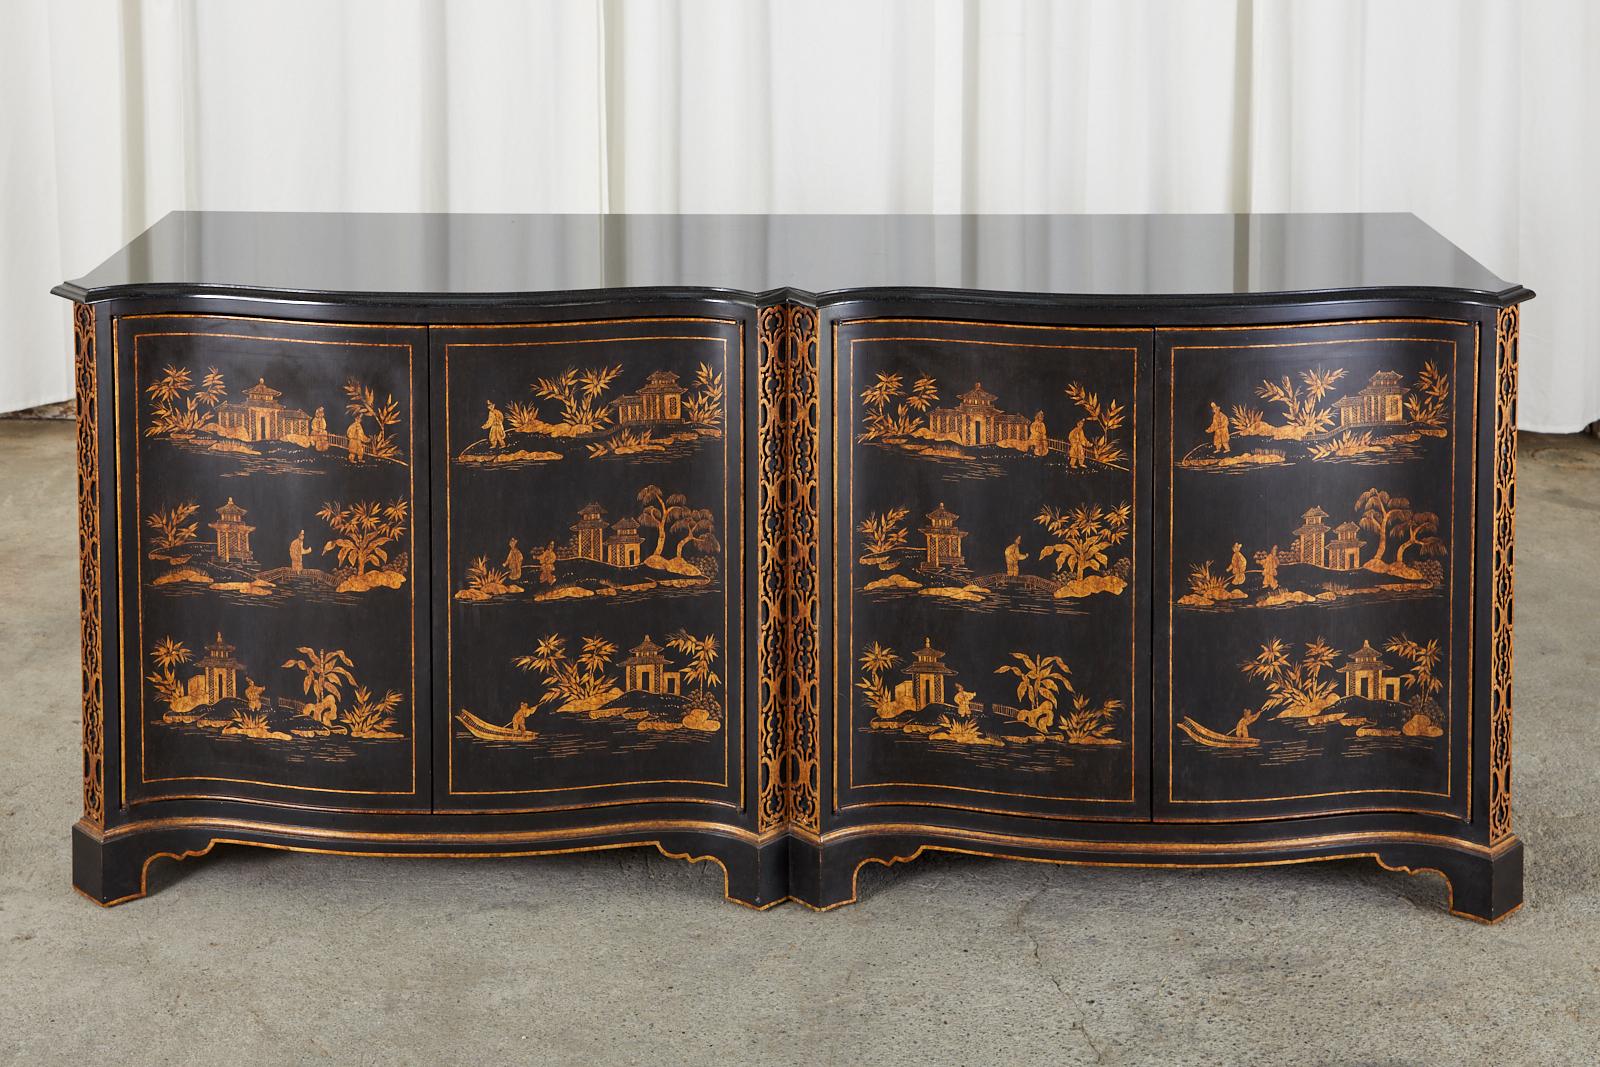 Spectacular pair of large sideboard chests, buffets, or credenzas featuring hand-painted parcel gilt chinoiserie reserves by Nancy Corzine. The bespoke cabinets have a serpentine front with four large doors separated by columns of Chinese